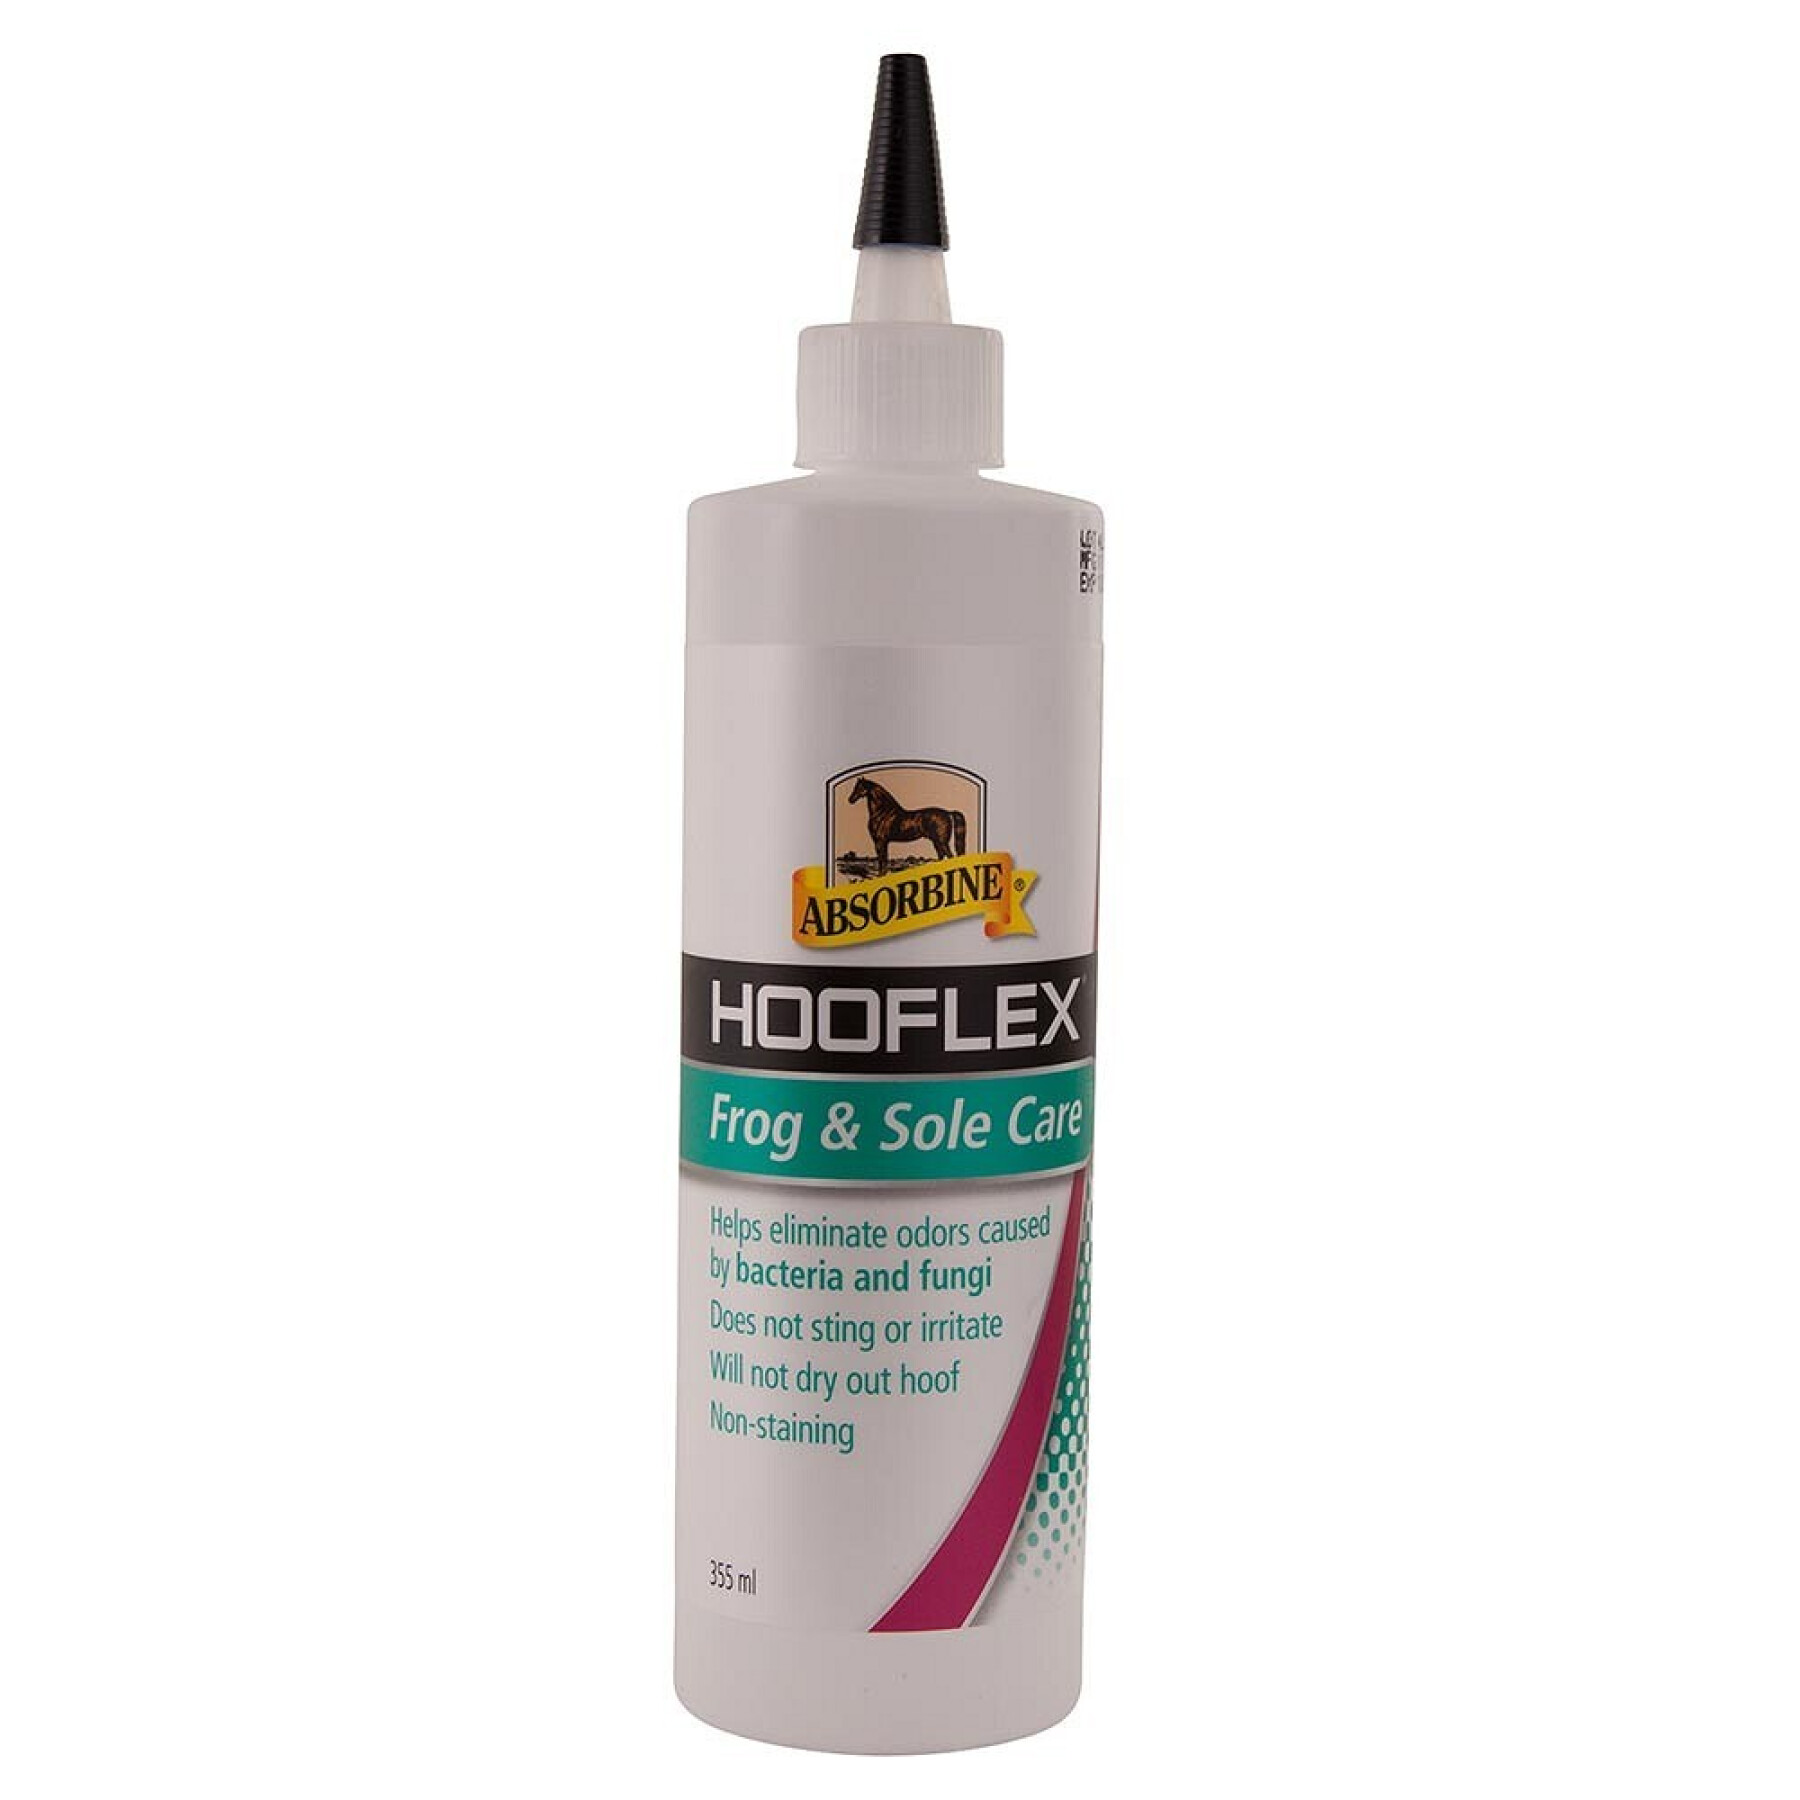 Horse hoof lotion Absorbine Frog&Sole Care